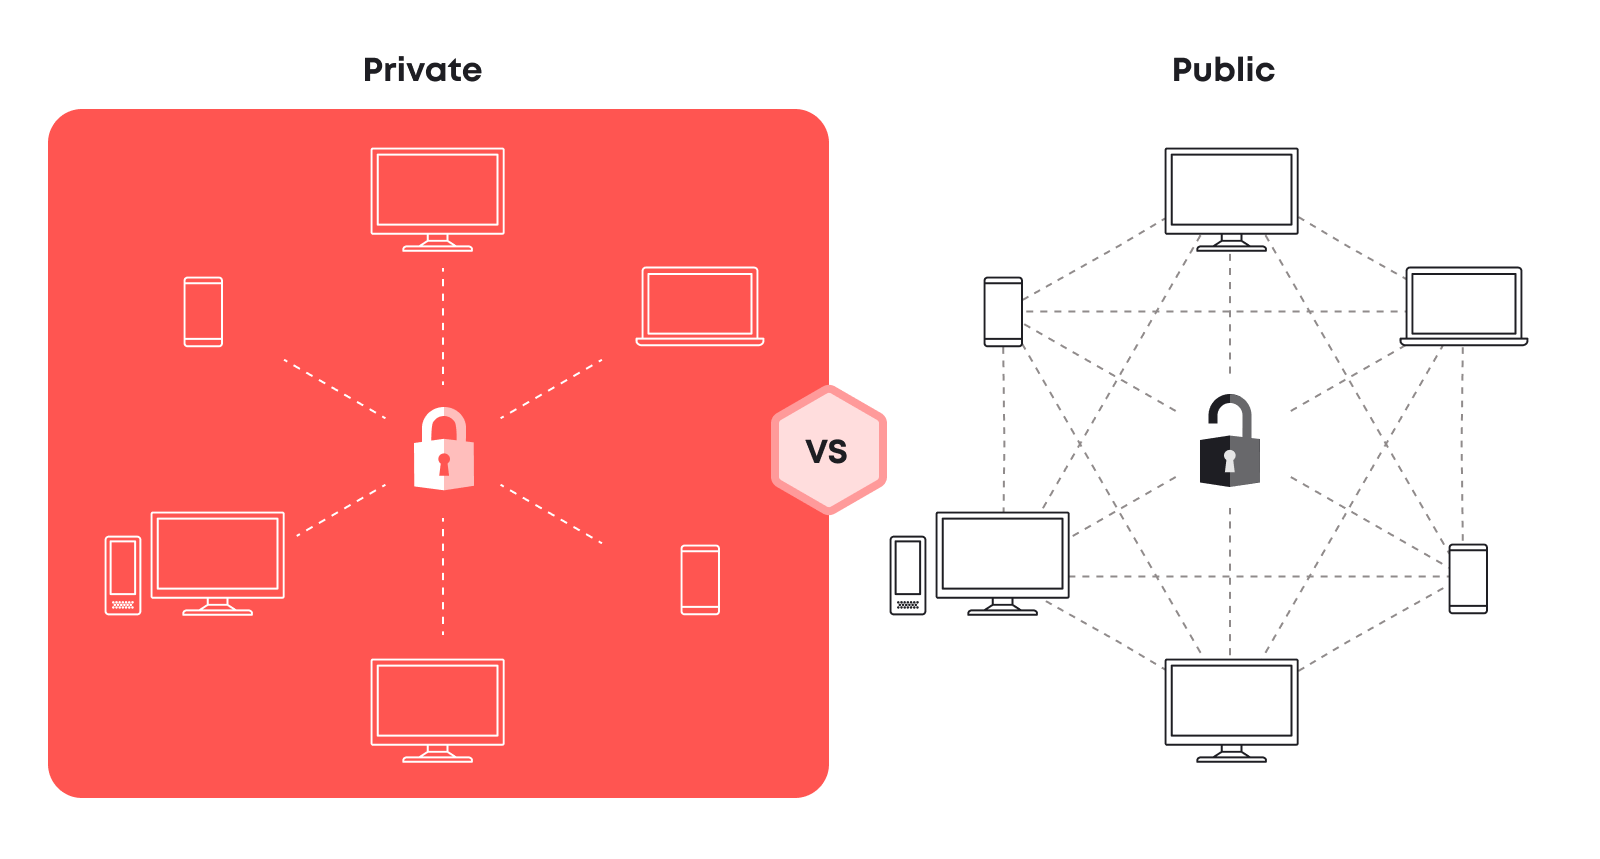 Public blockchains offer a quick entry point into the blockchain world, while private ones provide optimized performance and enhanced security.